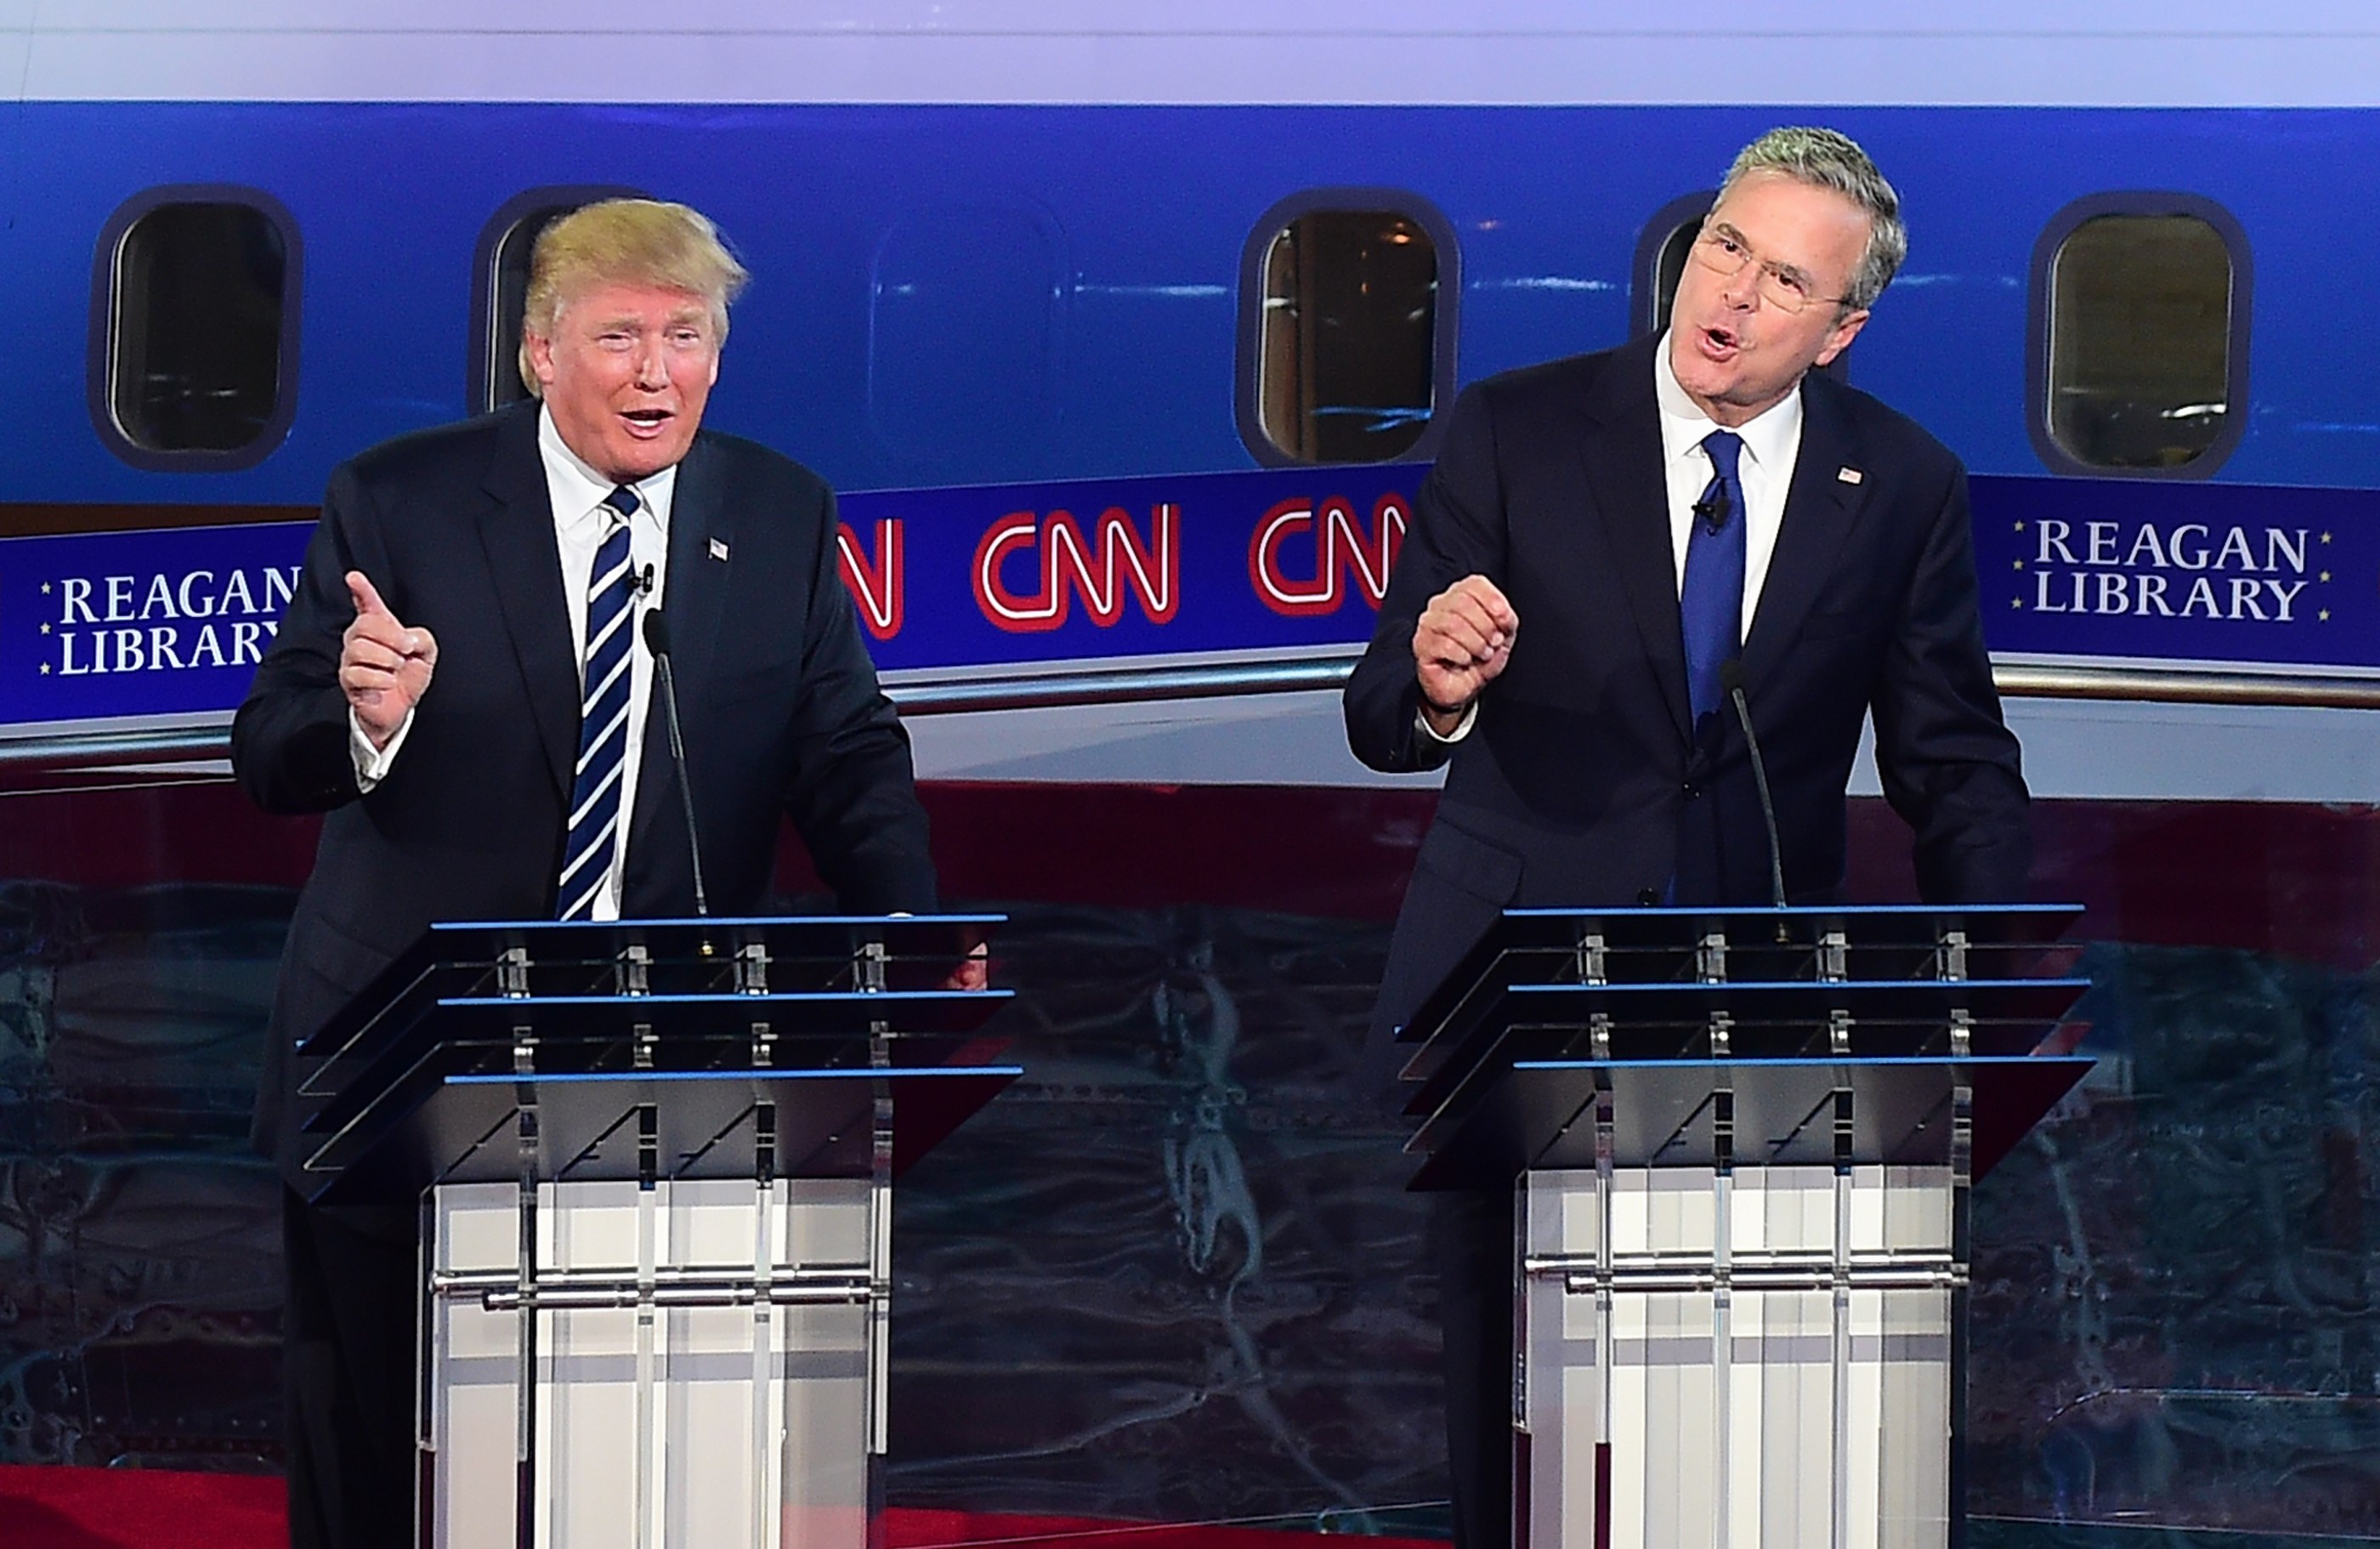 Republican presidential hopeful real estate magnate Donald Trump and former Florida Gov. Jeb Bush speak during the Republican presidential debate at the Ronald Reagan Presidential Library in Simi Valley, California on September 16, 2015. (FREDERIC J BROWN—AFP/Getty Images)